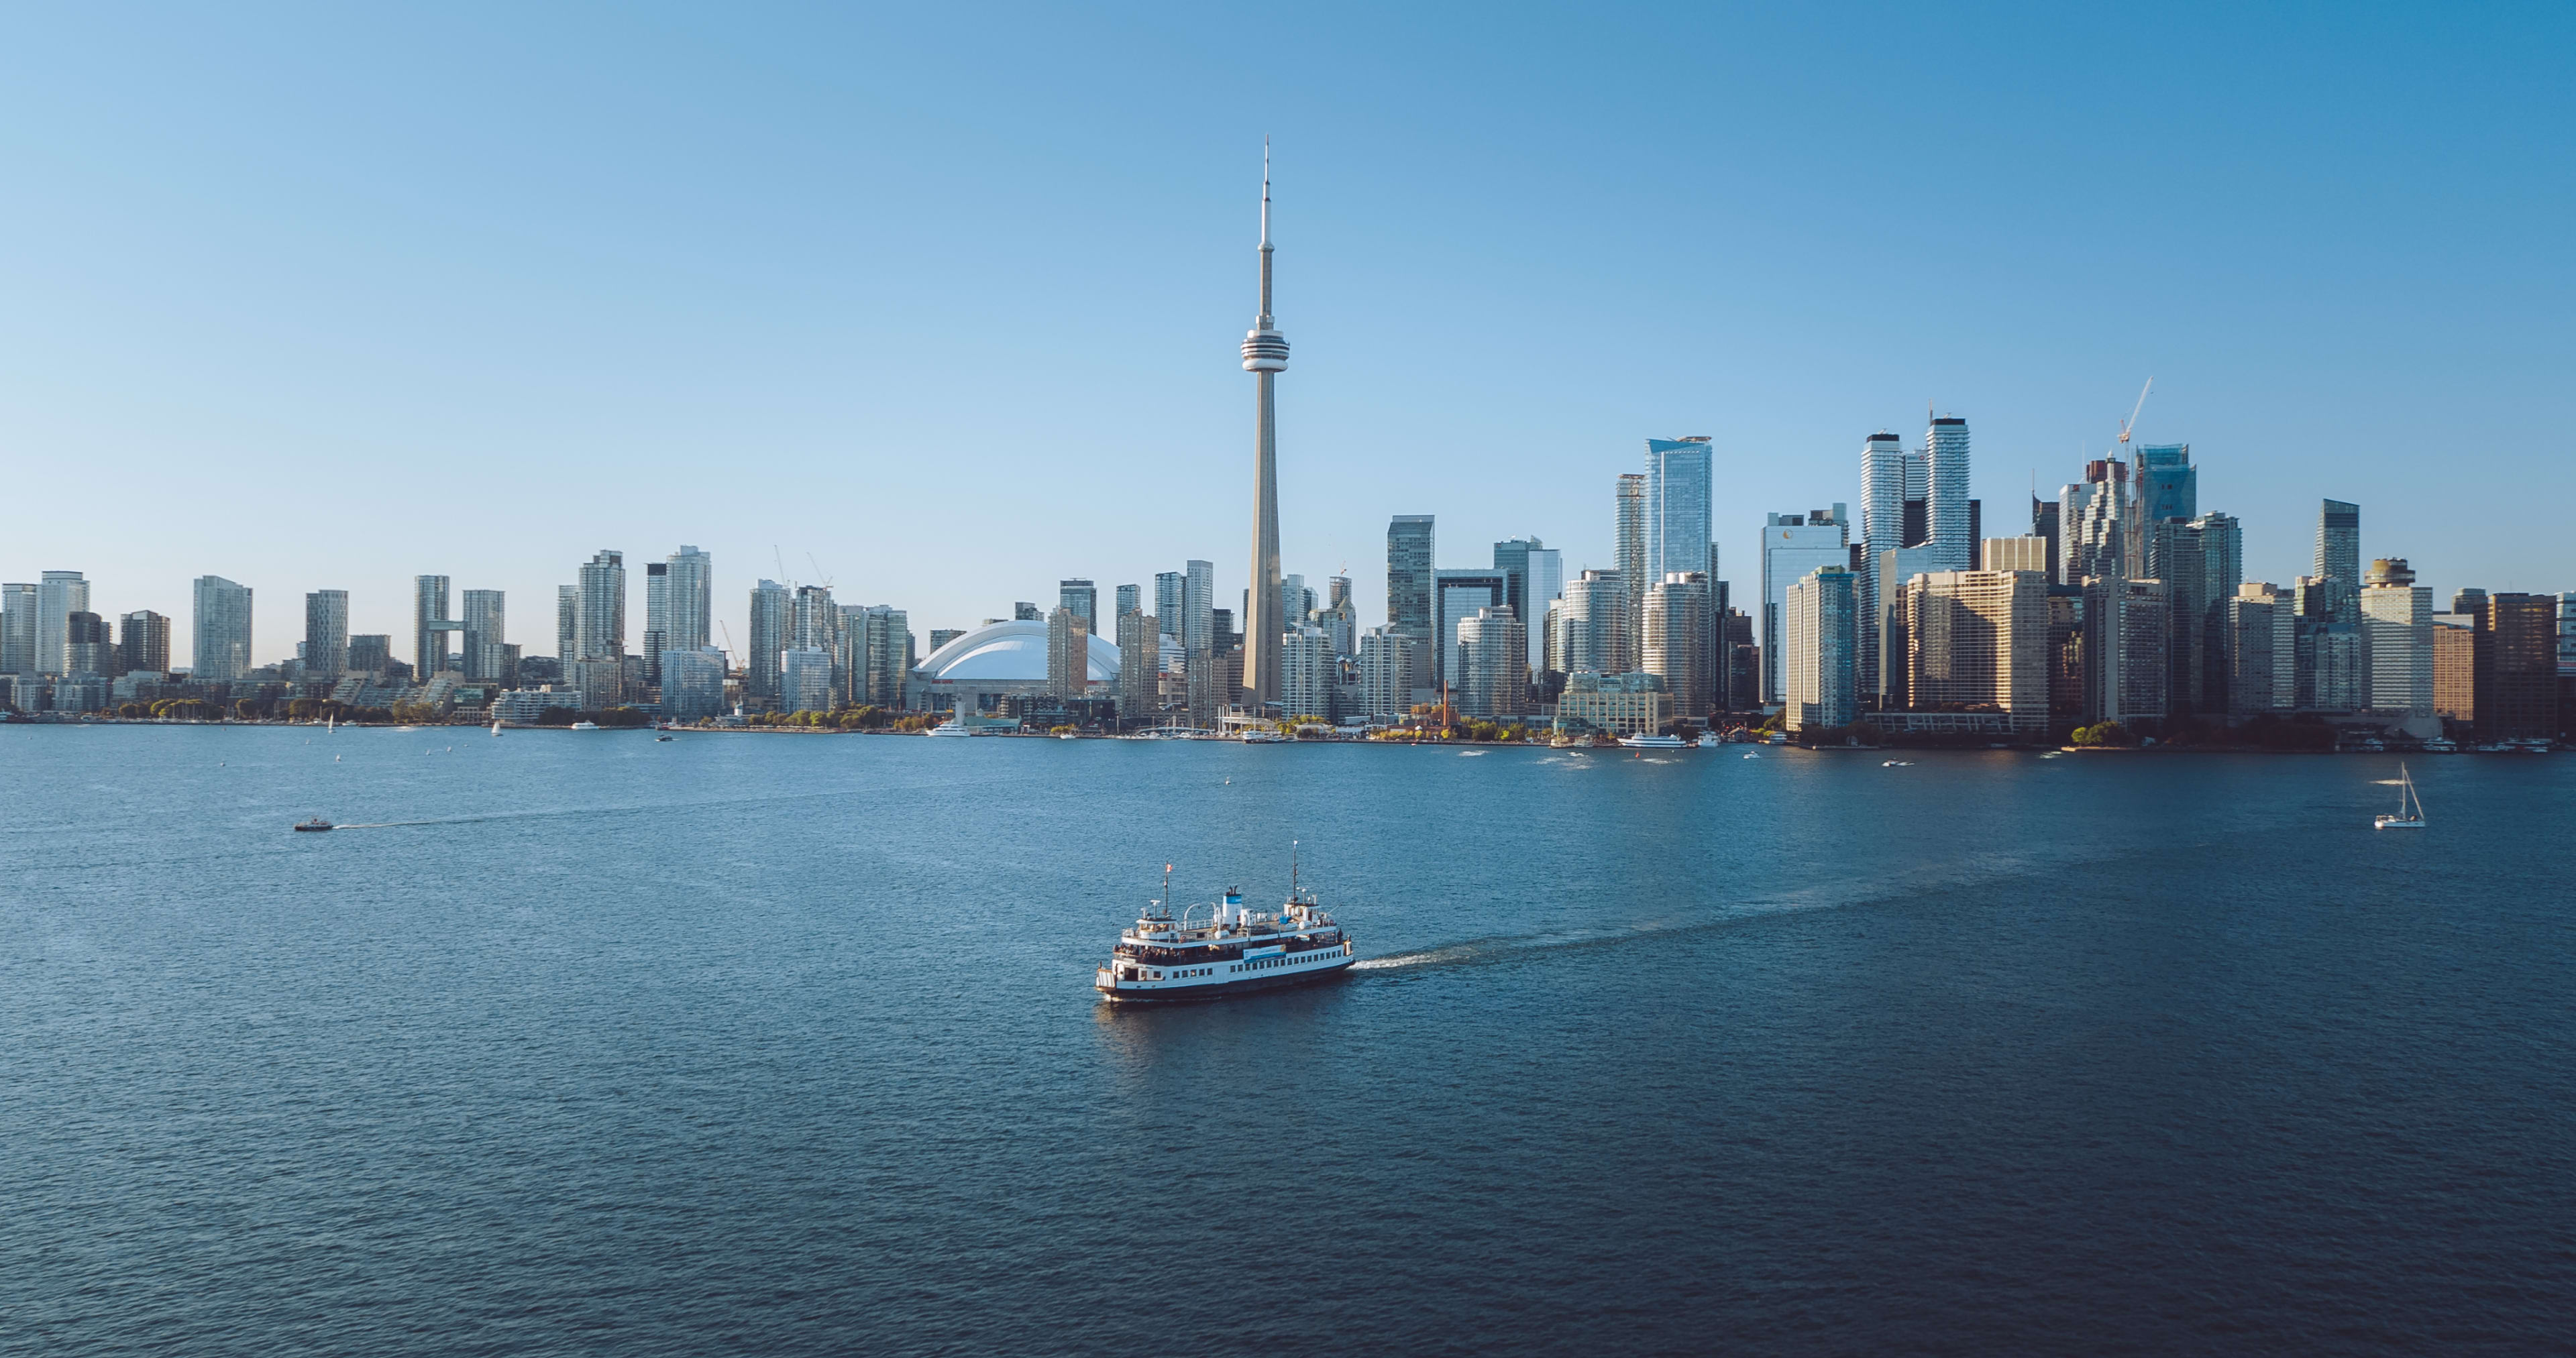 Toronto city skyline overlooking Lake Ontario with ferry in the water